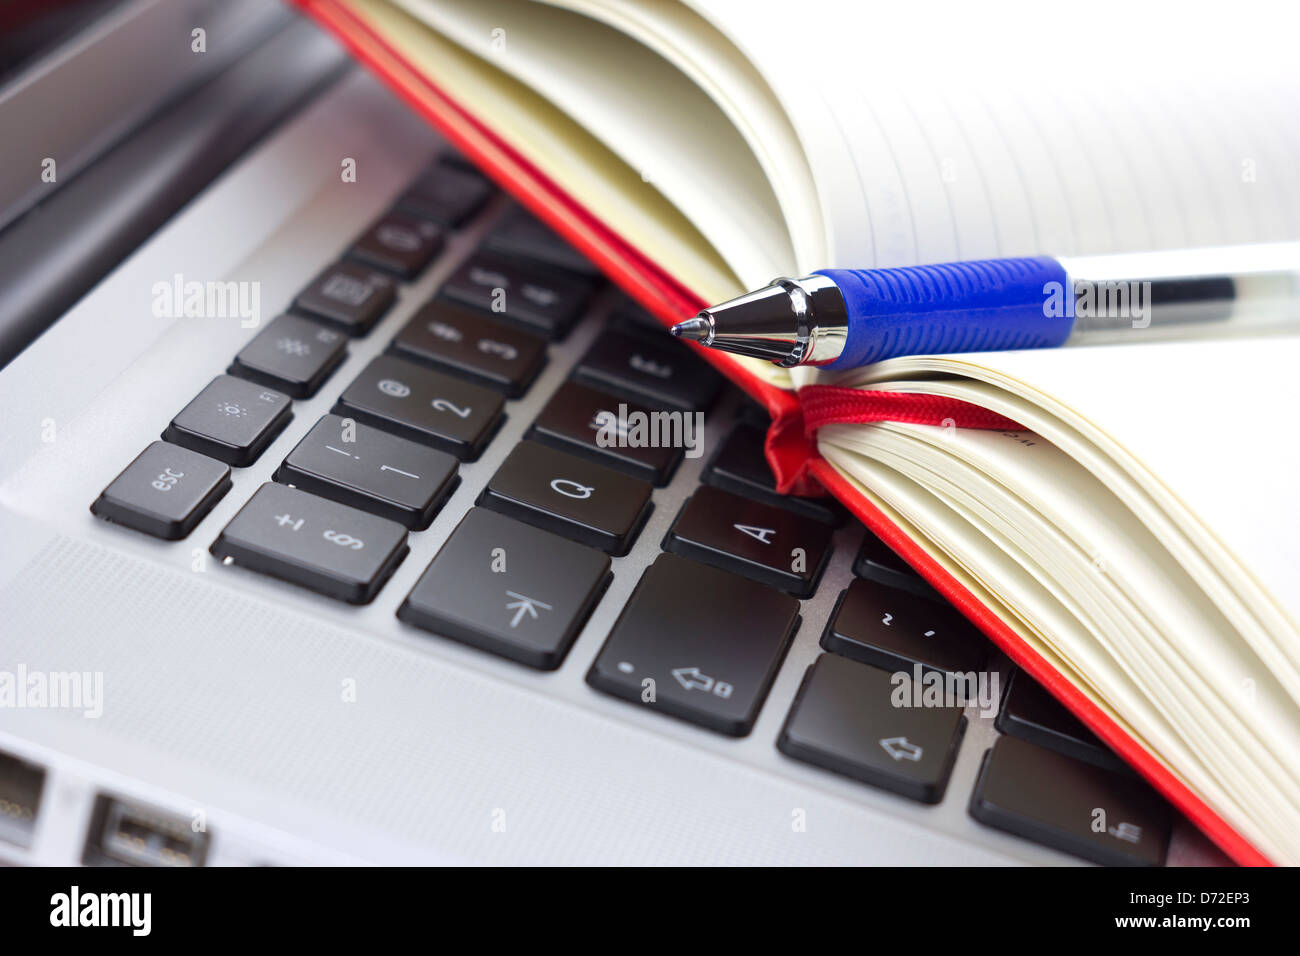 Red calendar or organizer or notebook and pen on the laptop Stock Photo